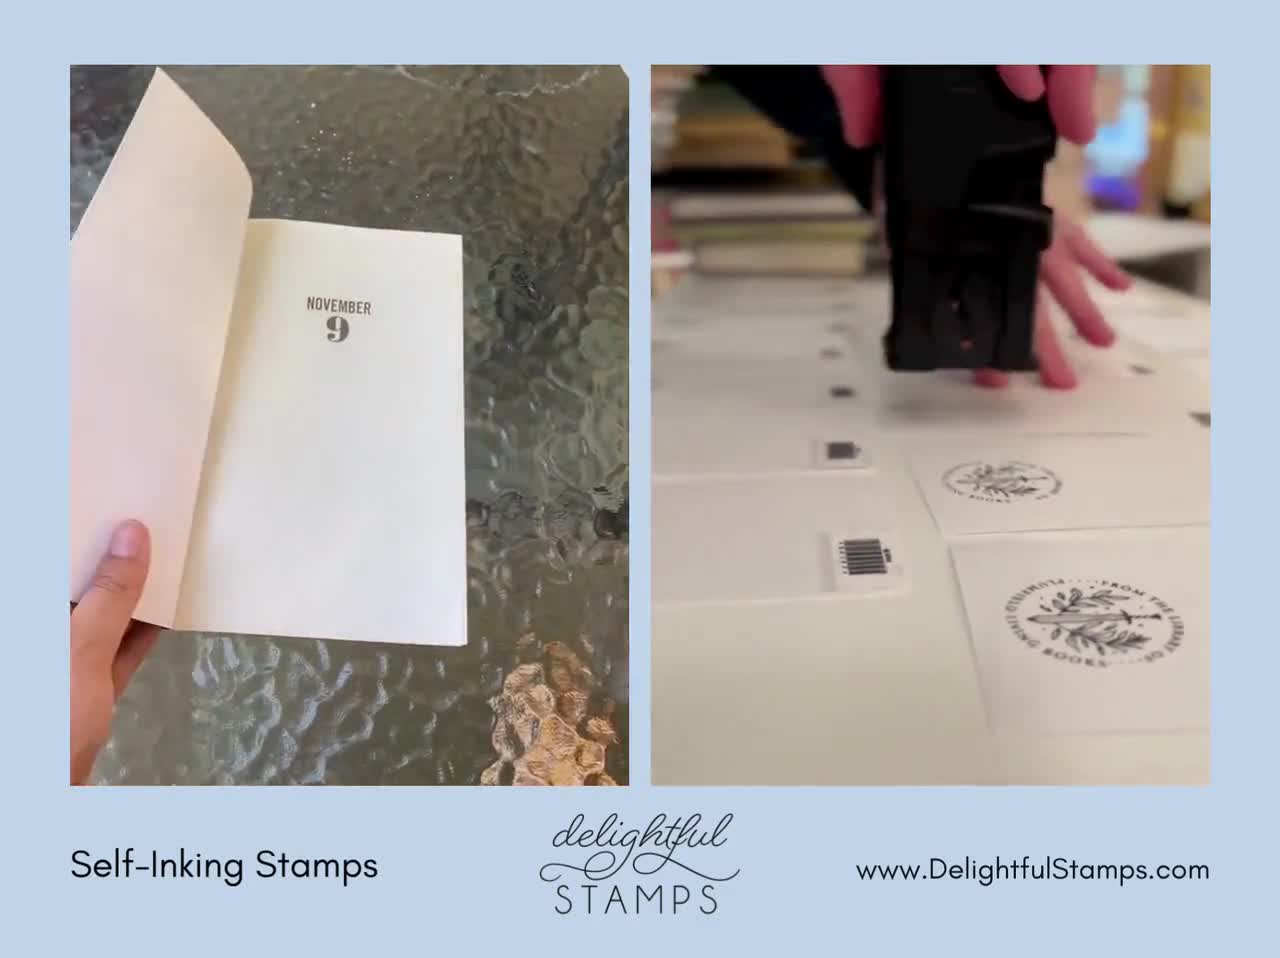 Book Embosser Personalized | From the Library of Stamp | Ex Libris Stamp |  Rubber Stamp, Self Inking Stamp or Embosser | SKU: STL059